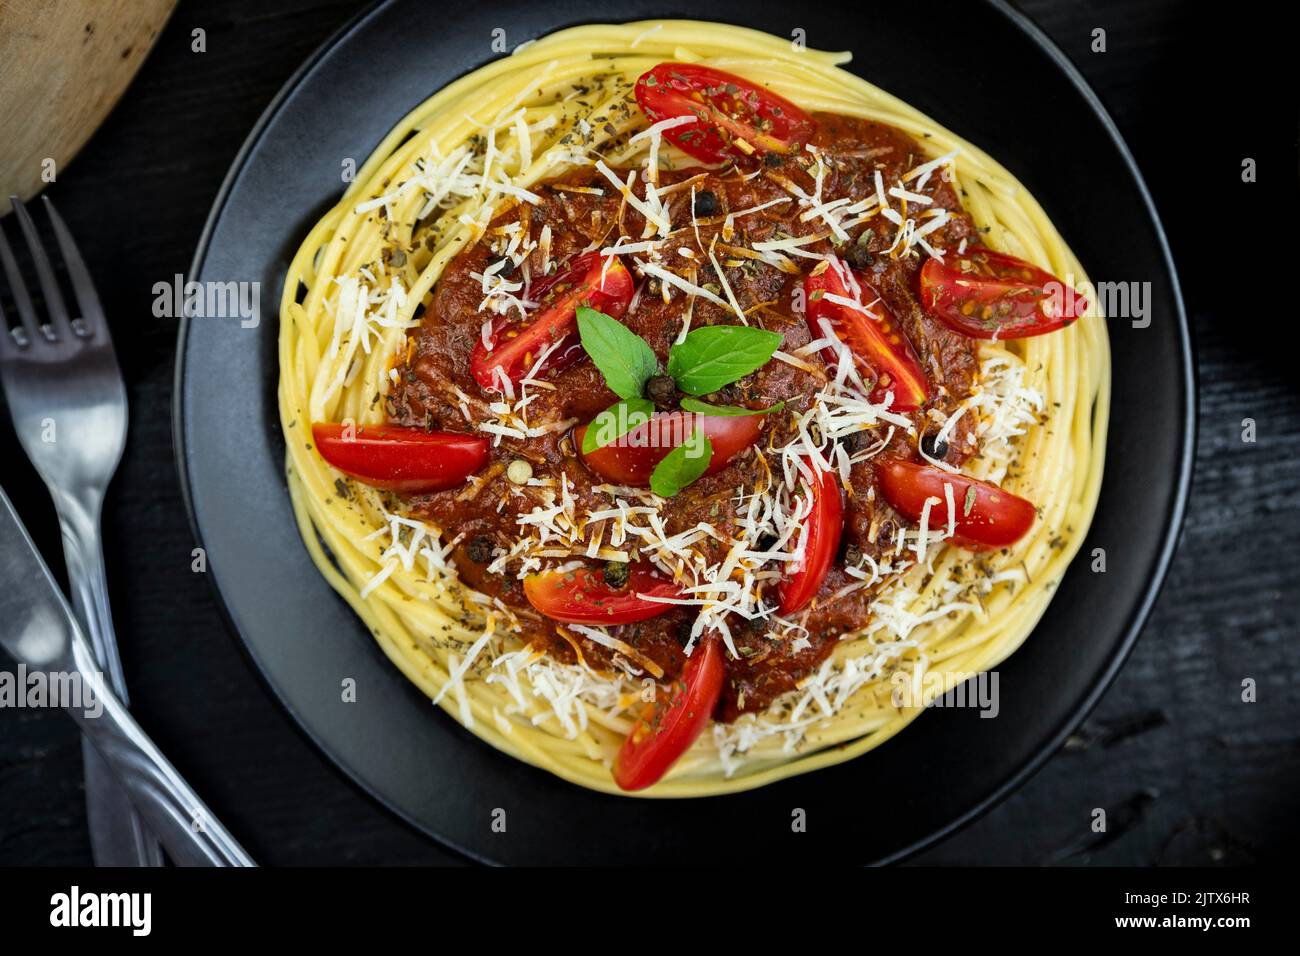 Italian spaghetti pasta with tomato sauce, parmesan cheese and basil served on the plate on rustic kitchen table. Flat lay. Top view. Stock Photo